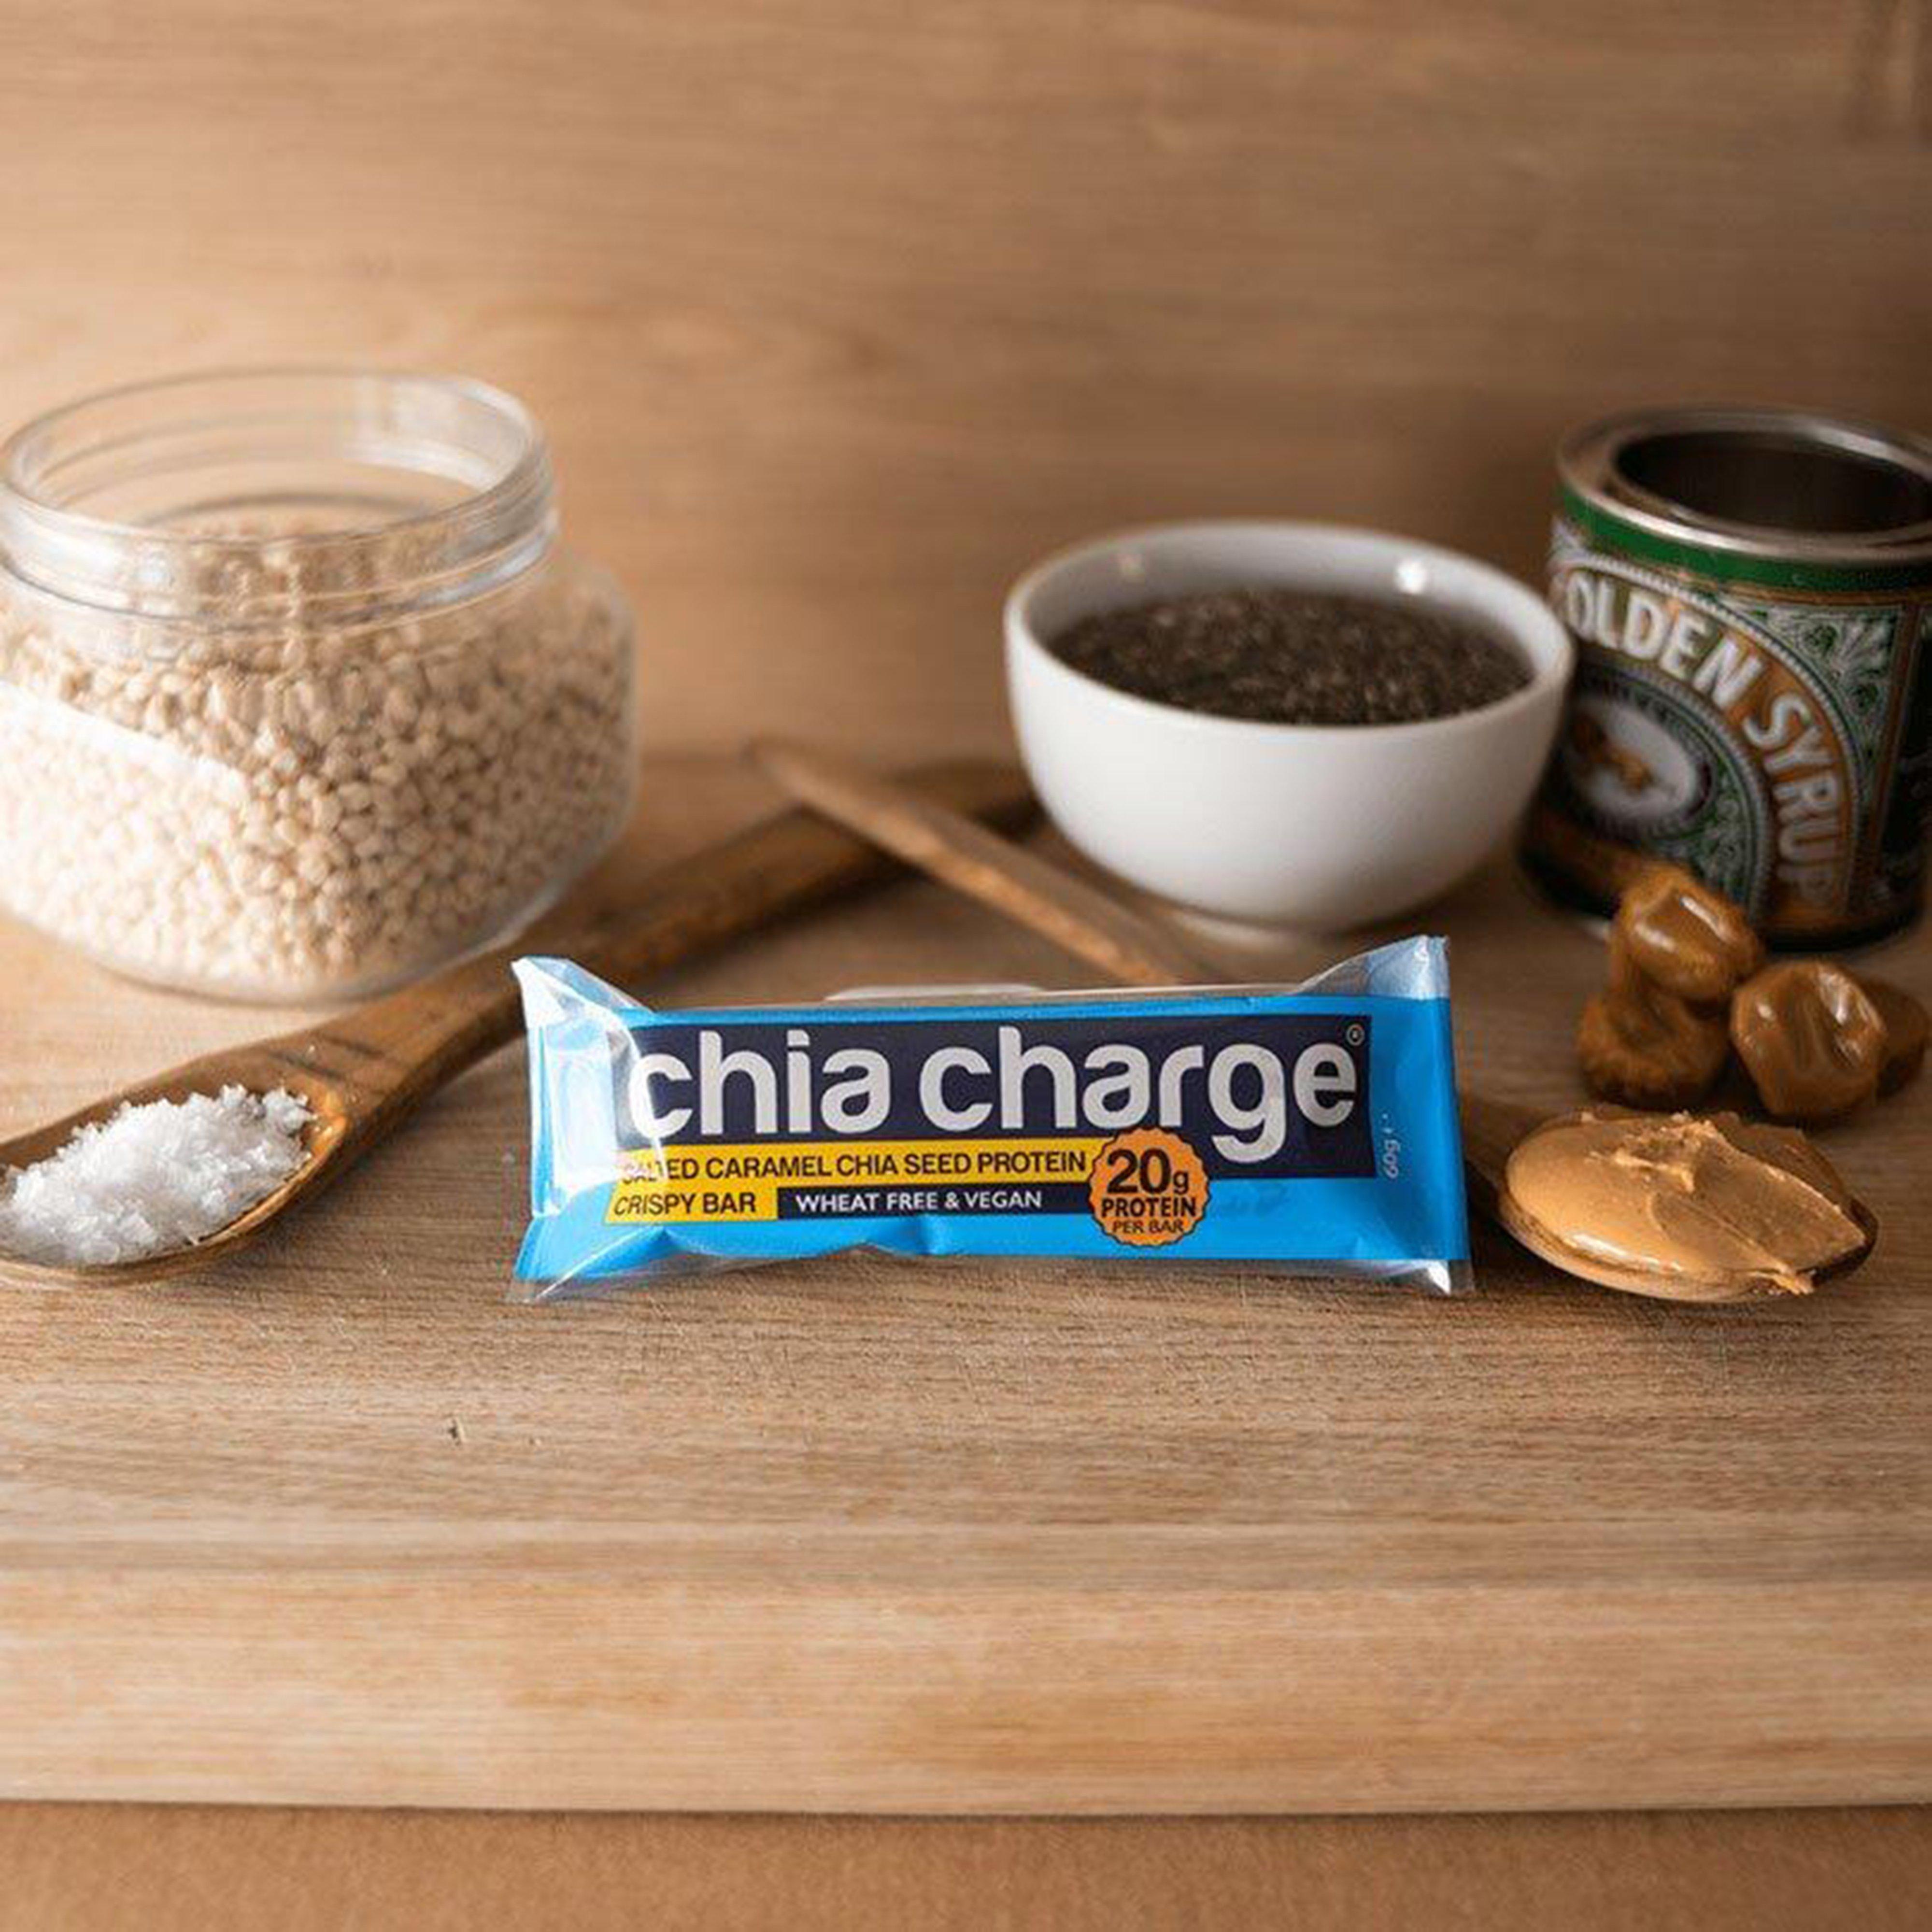 Chia Charge Salted Caramel Chia Seed Protein Crispy Bar 60g Review